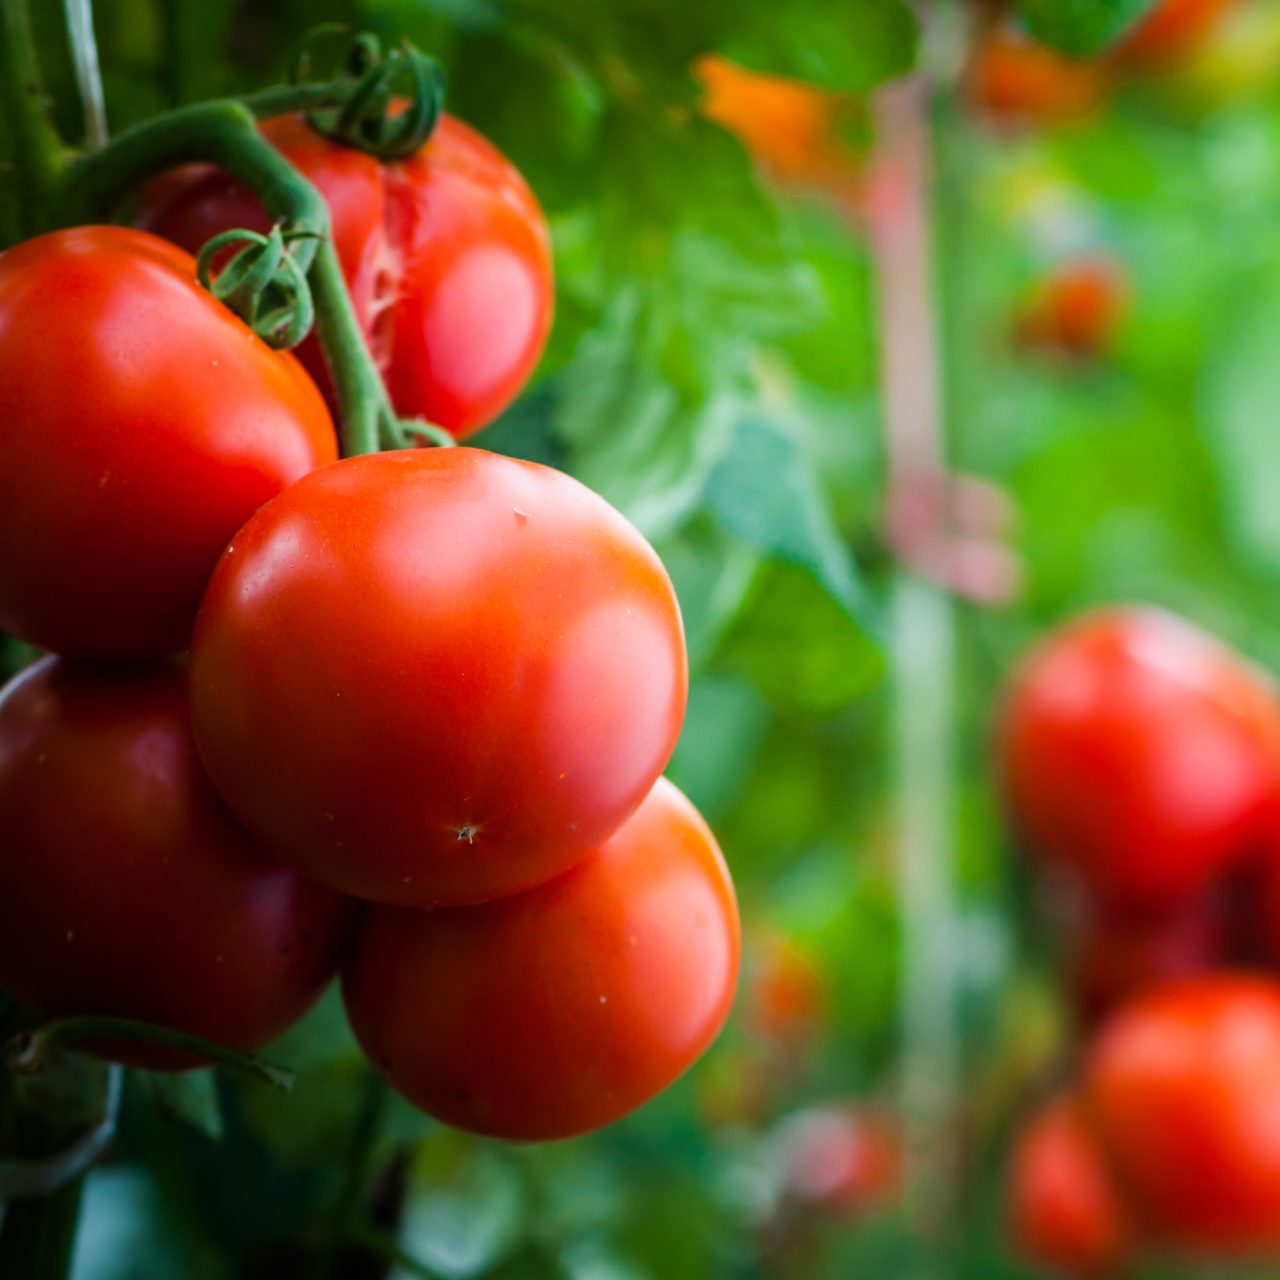 Ripe,Organic,Tomatoes,In,Garden,Ready,To,Harvest